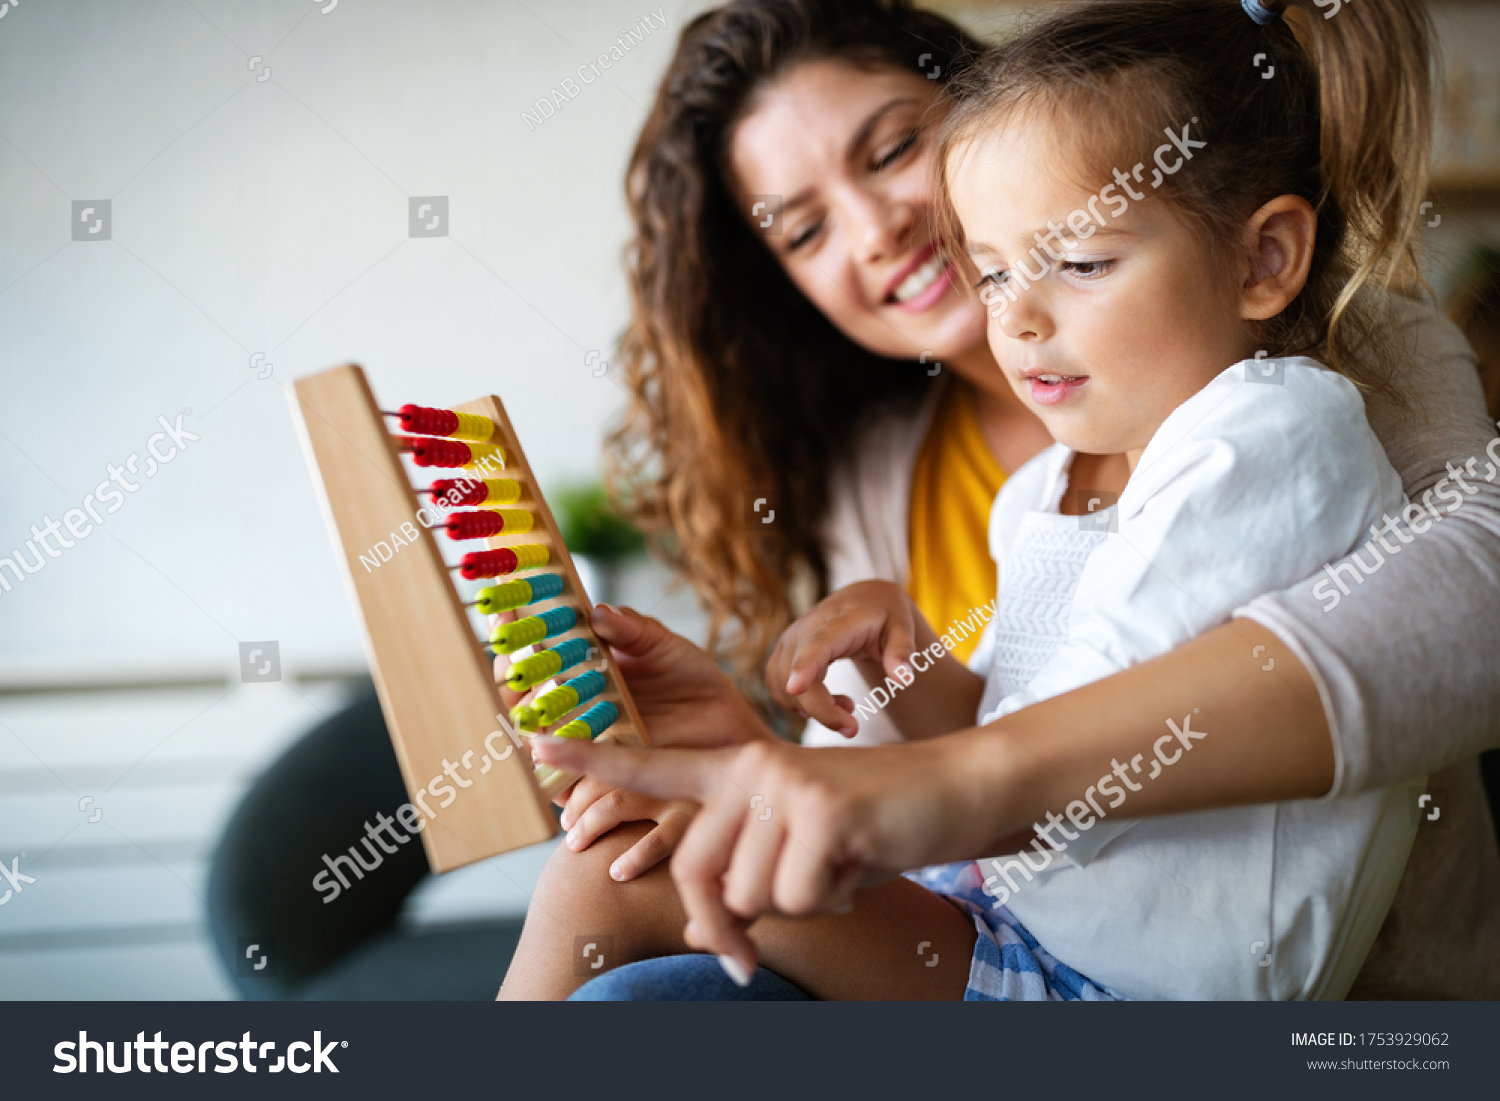 Mother and little cute girl, kid playing with abacus, early education #1753929062